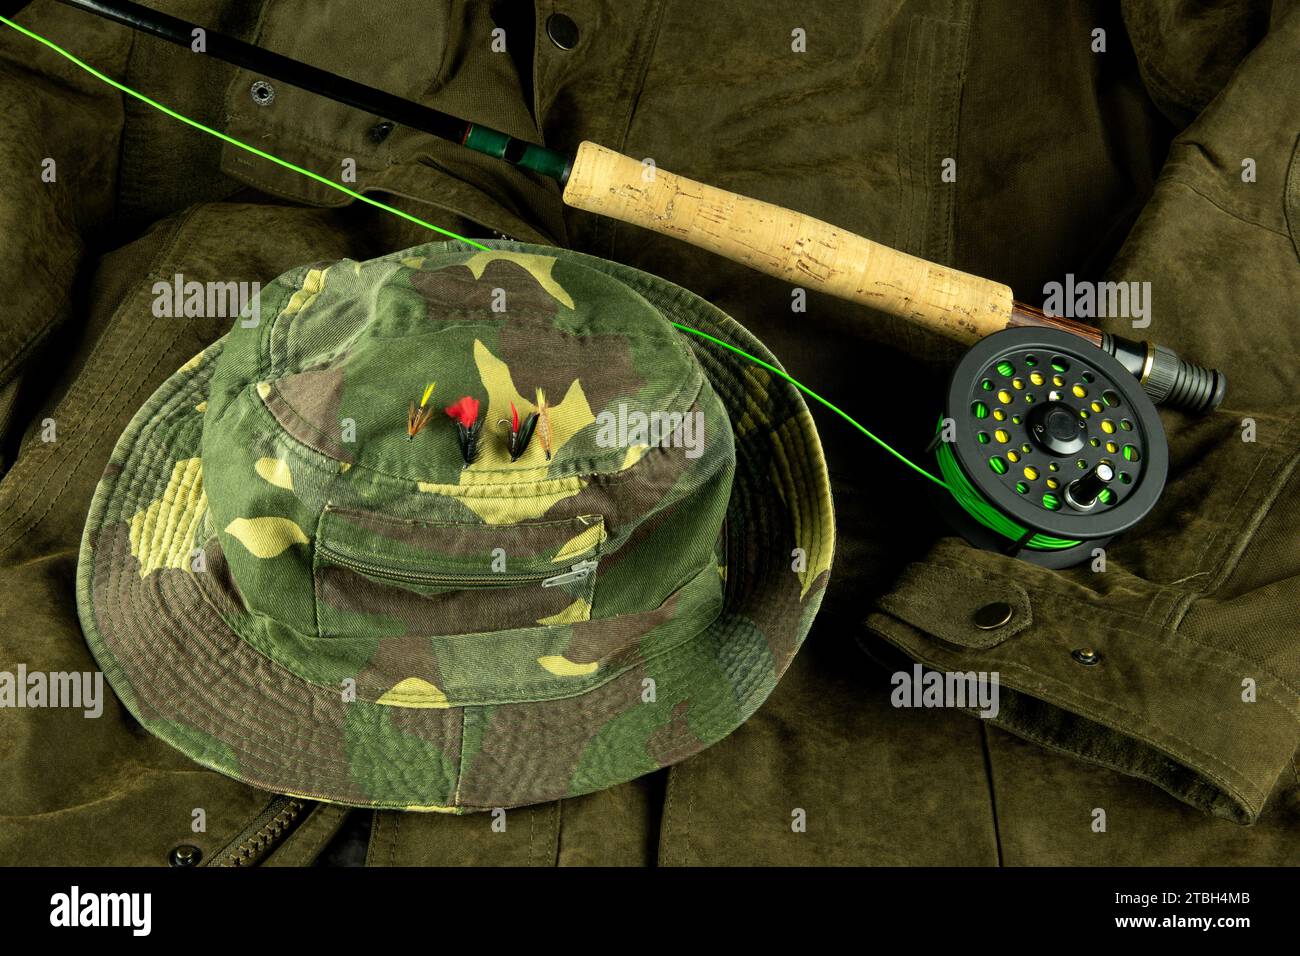 Fly fishing rod and reel with fly line on an outdoor coat with trout flies on a fishing hat Stock Photo